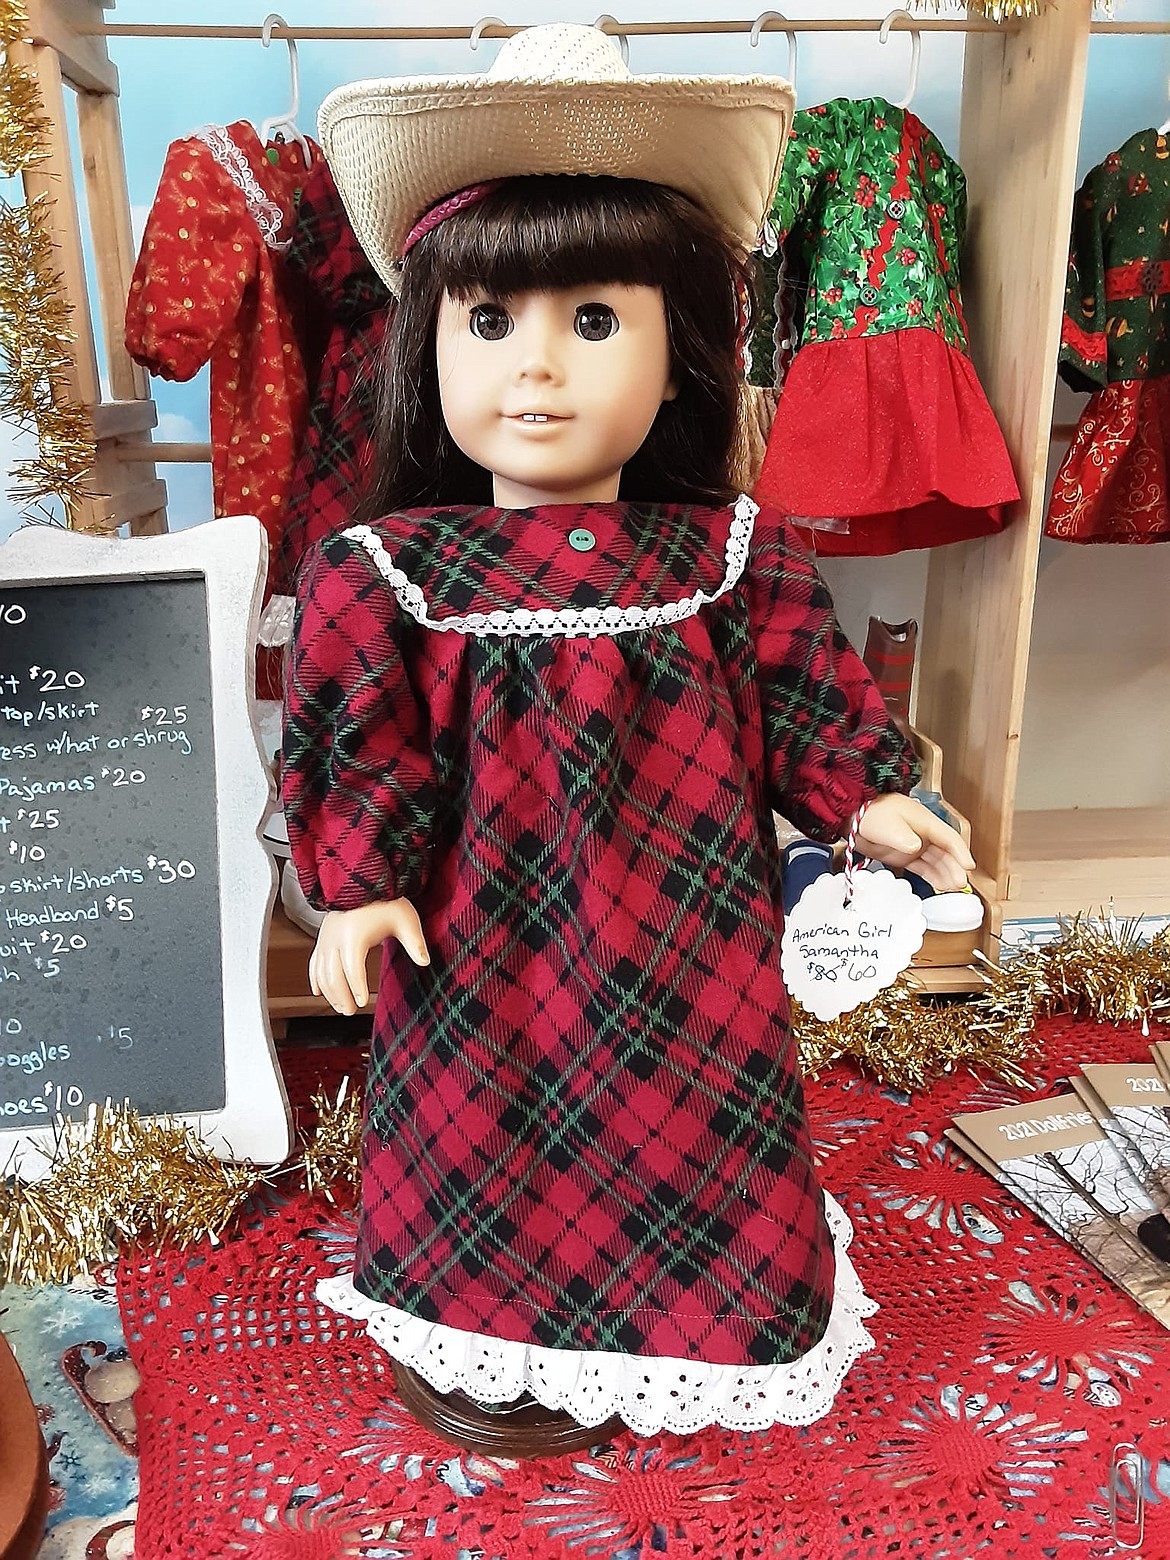 This festive holiday dress was a recent creation of Osborne's for Christmastime. She tries to new outfits and dresses for sale for each of the upcoming holidays and seasons throughout the year. (Photo courtesy Charlotte Osborne)